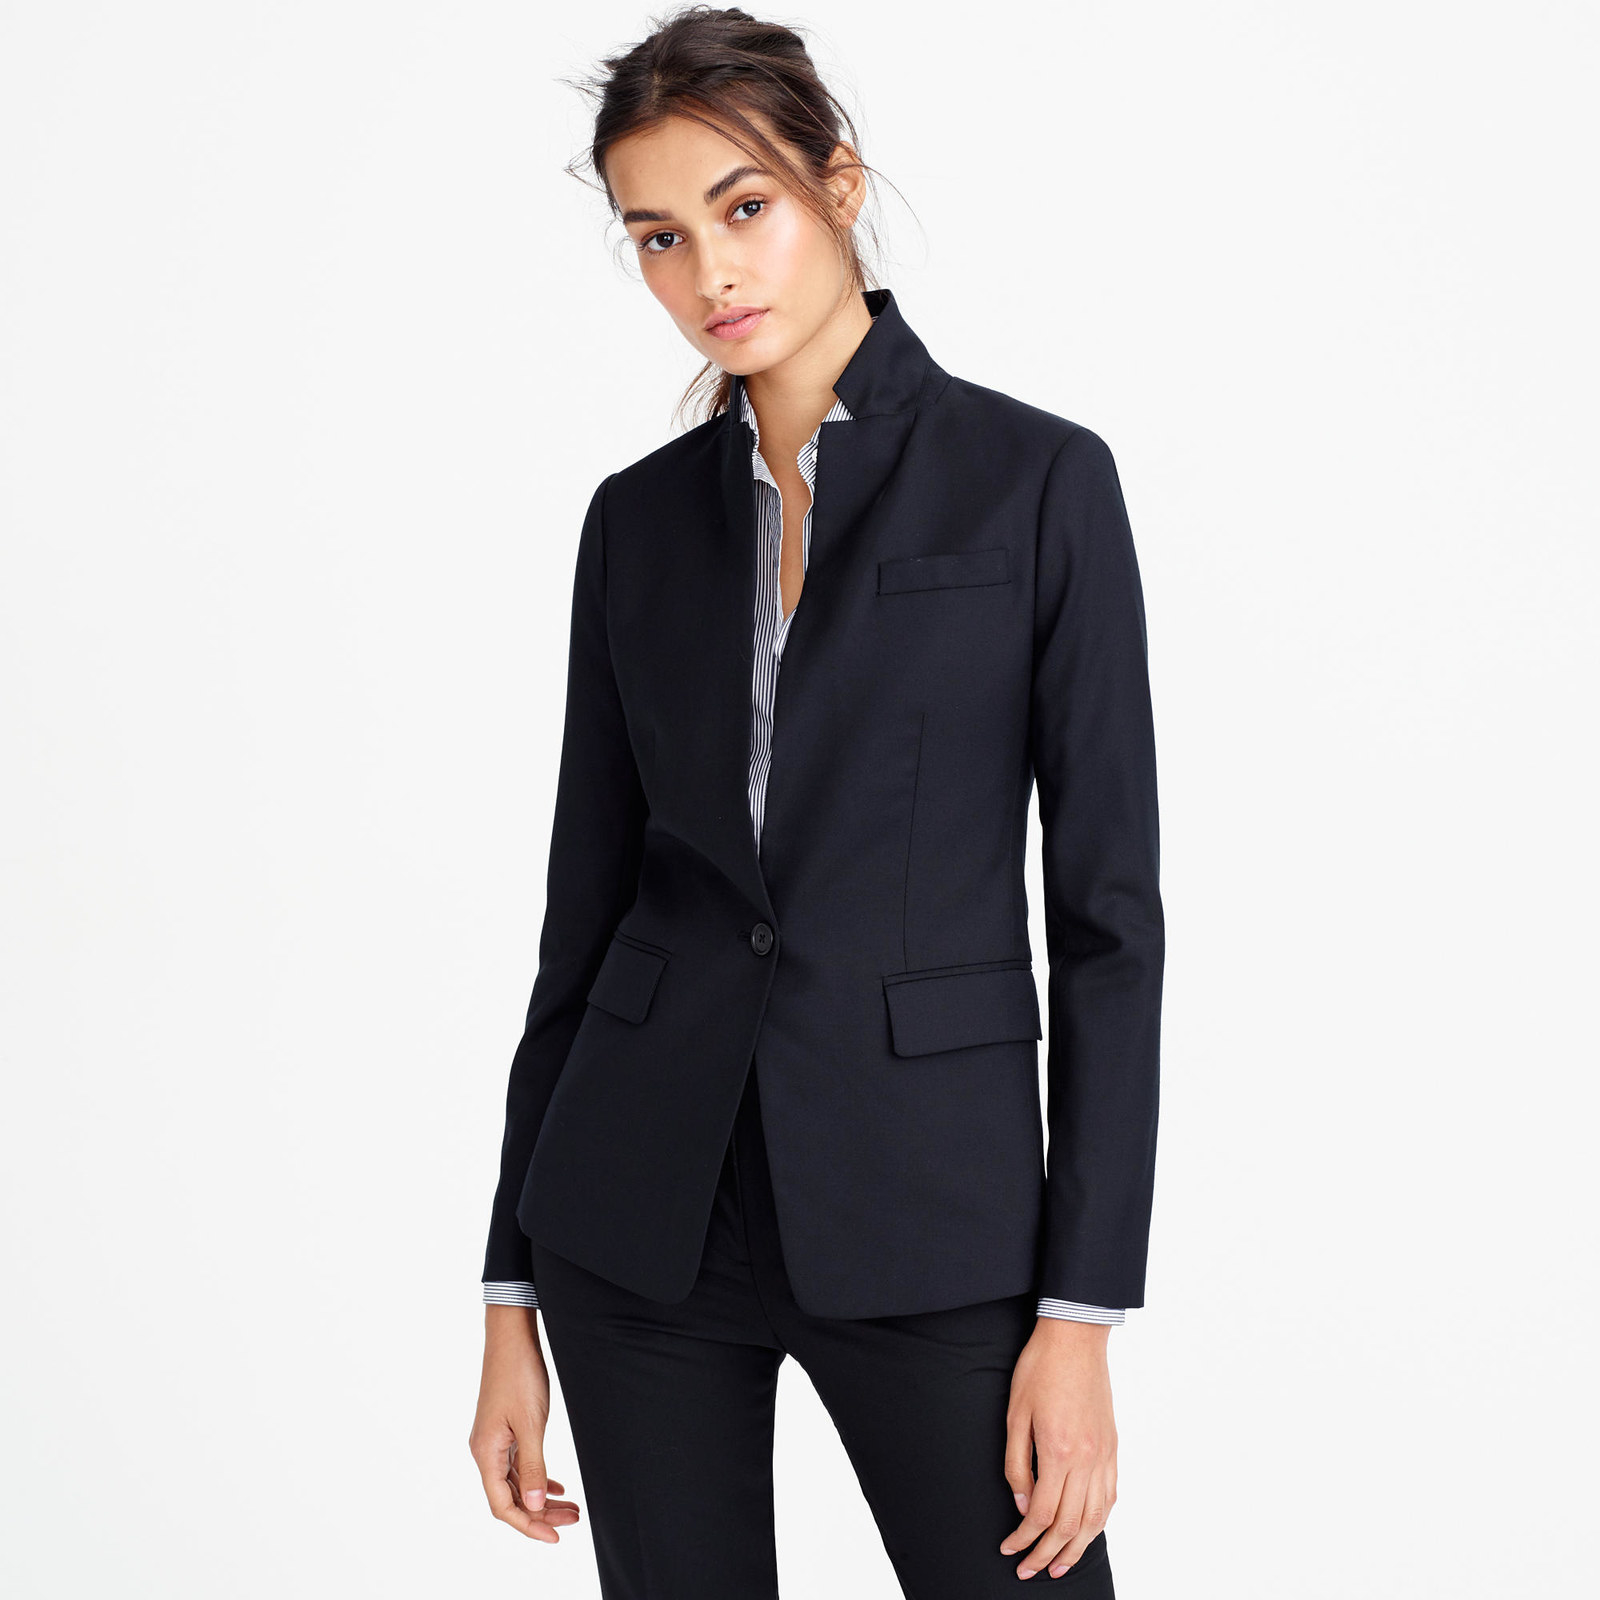 19 Pantsuits That Will Make You Feel Powerful